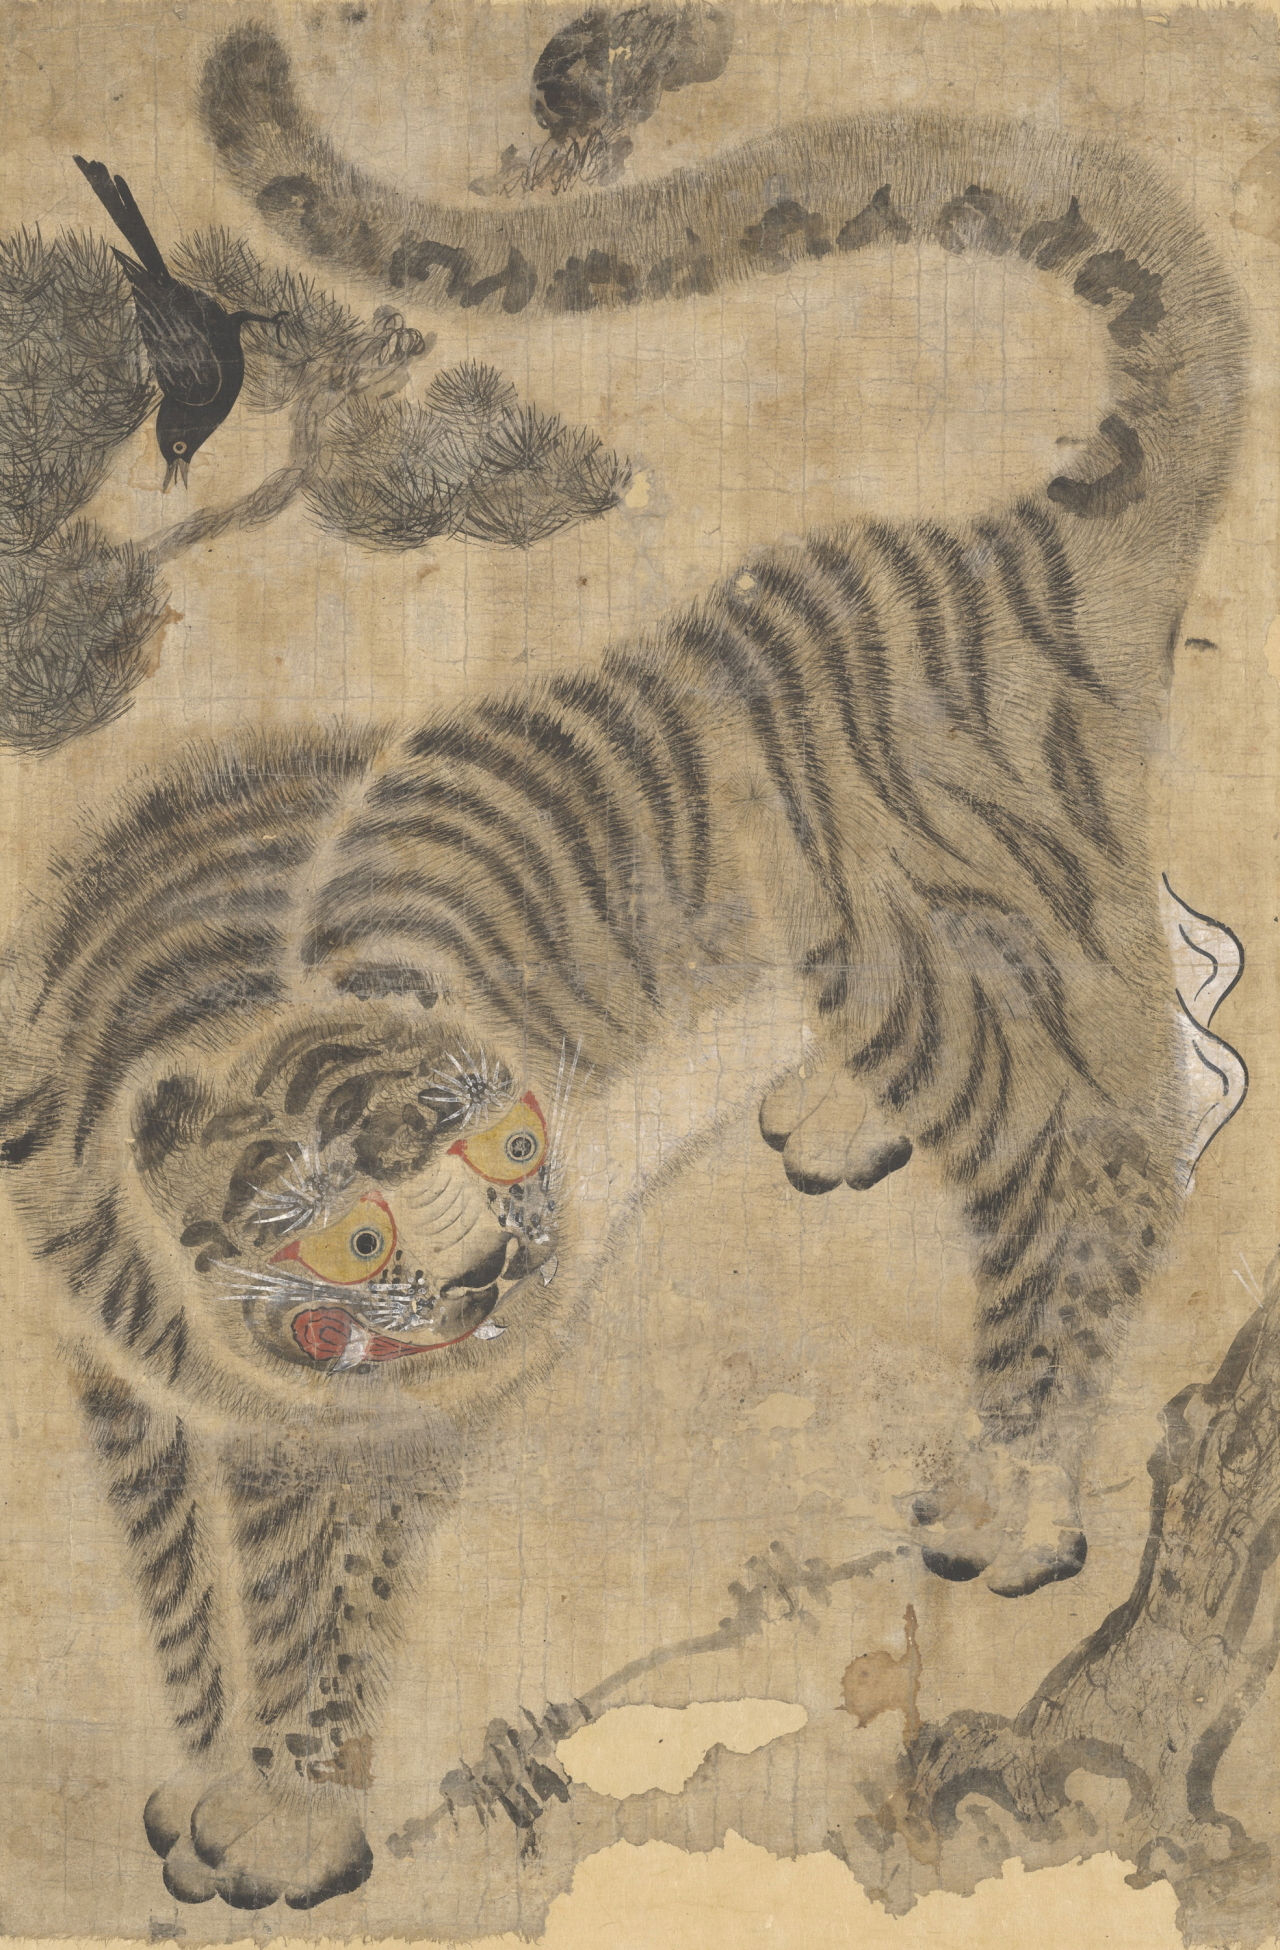 “Tiger and Magpie” from the late Samsung Chairman Lee Kun-hee’s collection. The painting was created in the 19th century. (NMK)